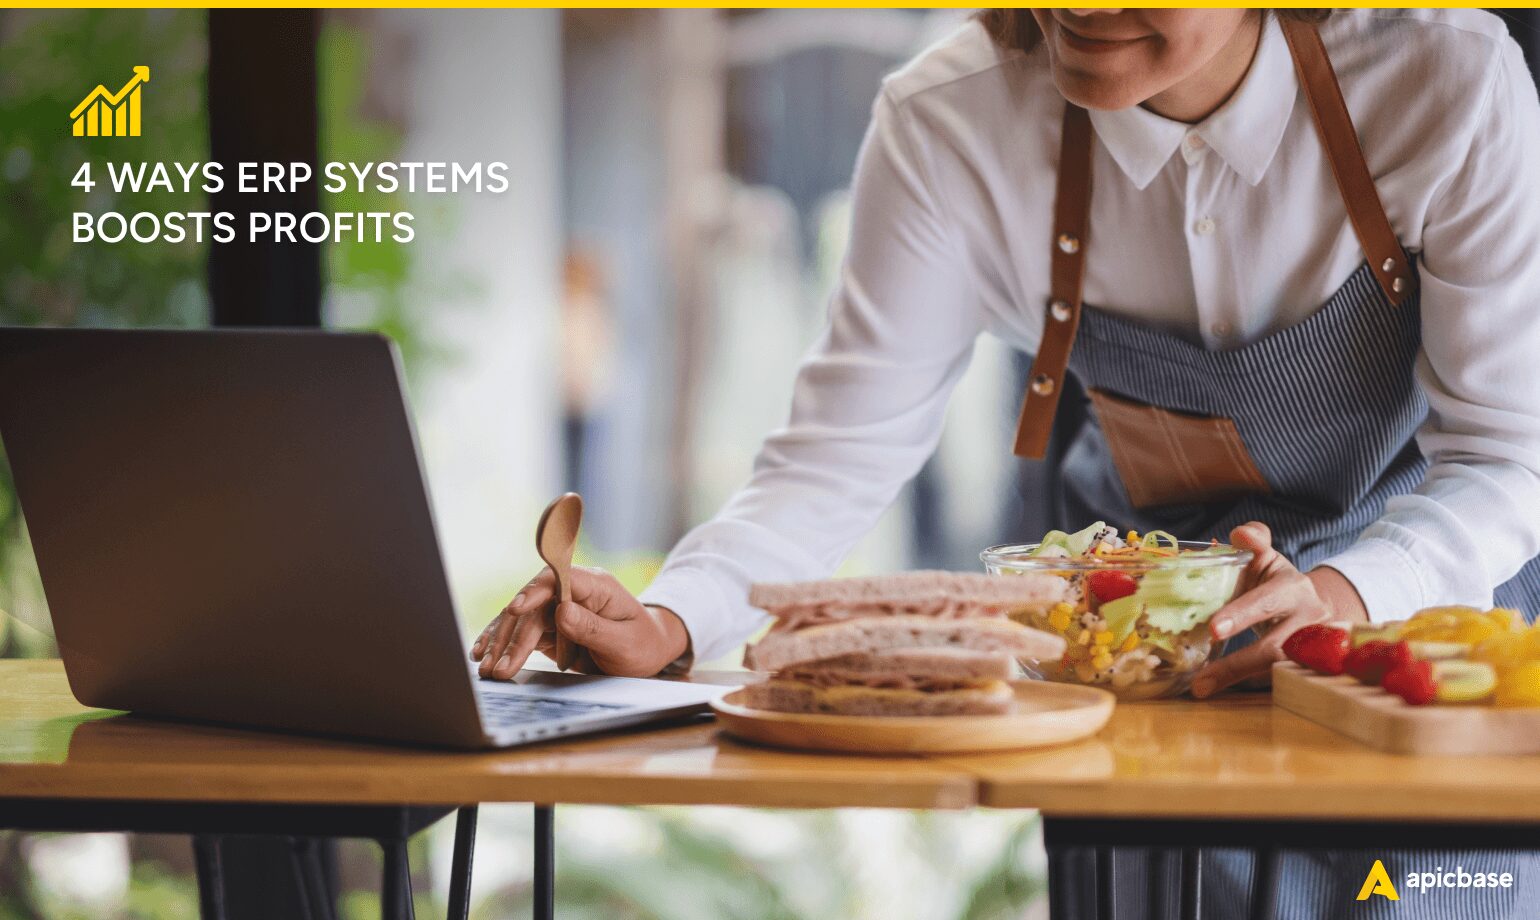 4 Ways Food and Beverage ERP Controls Costs and Boosts Profits